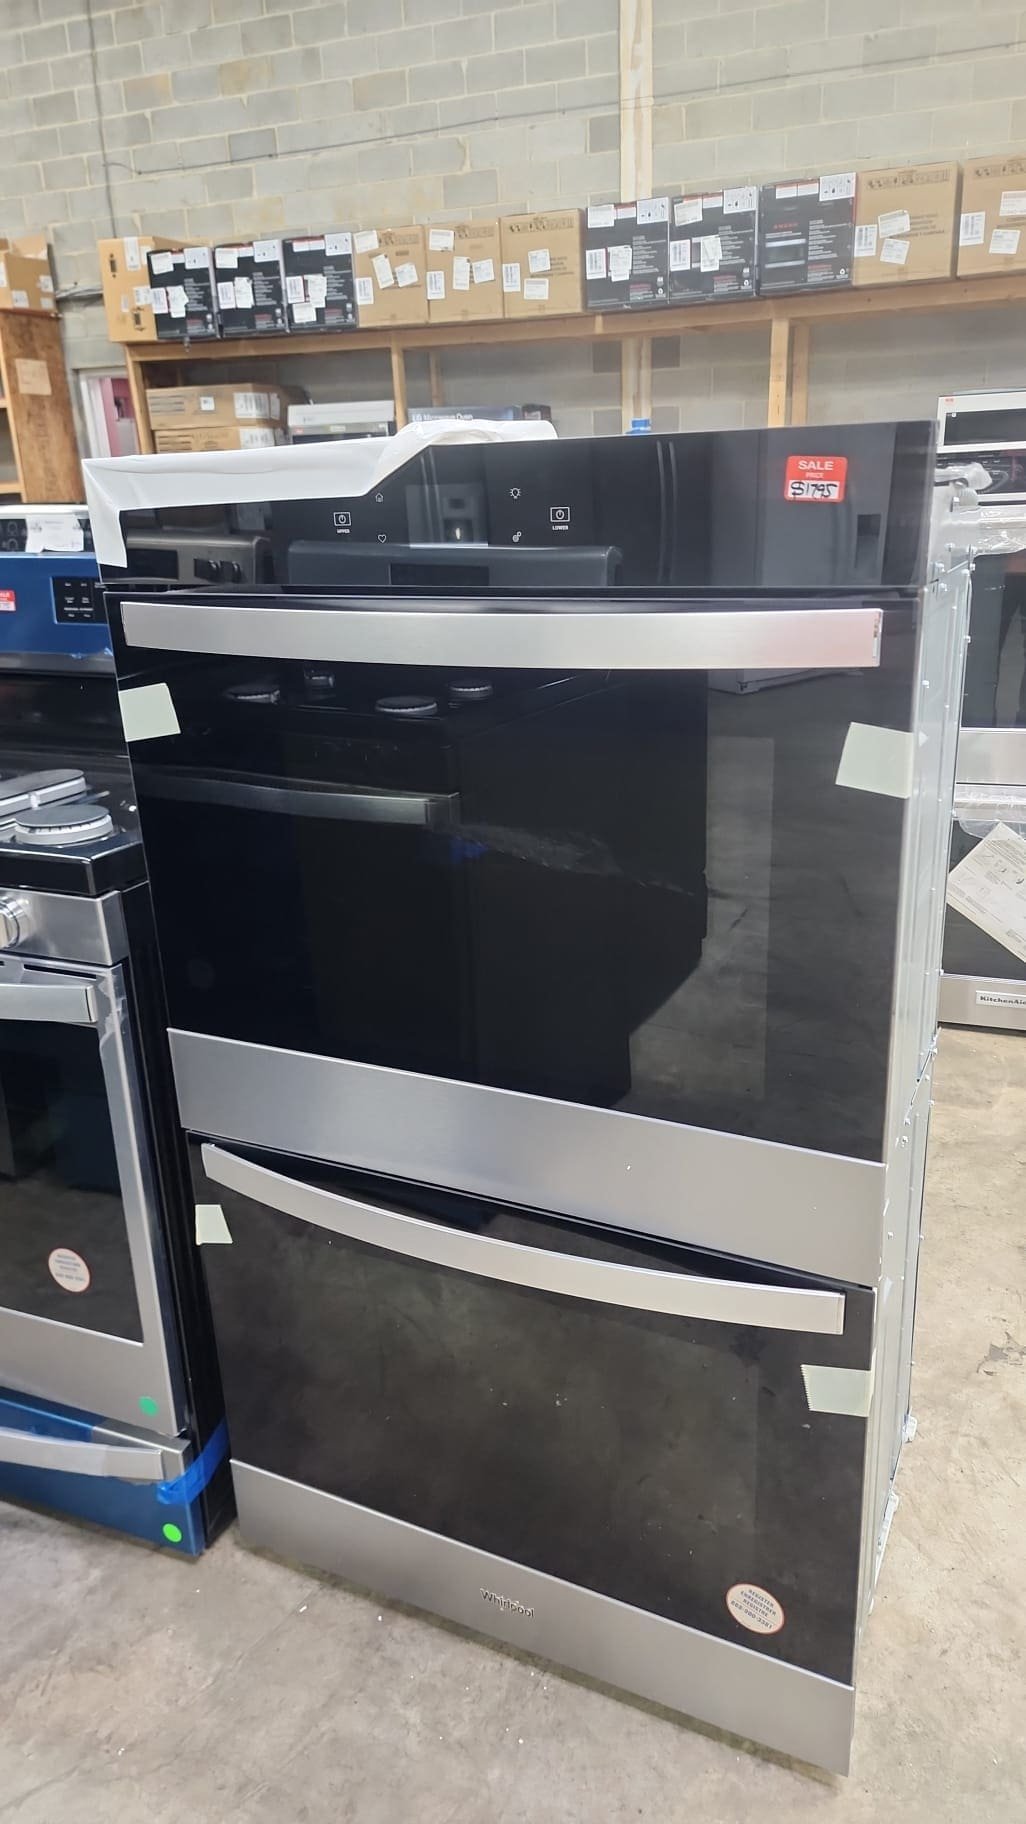 Whirlpool New 30″ Width Double Wall Oven – Black